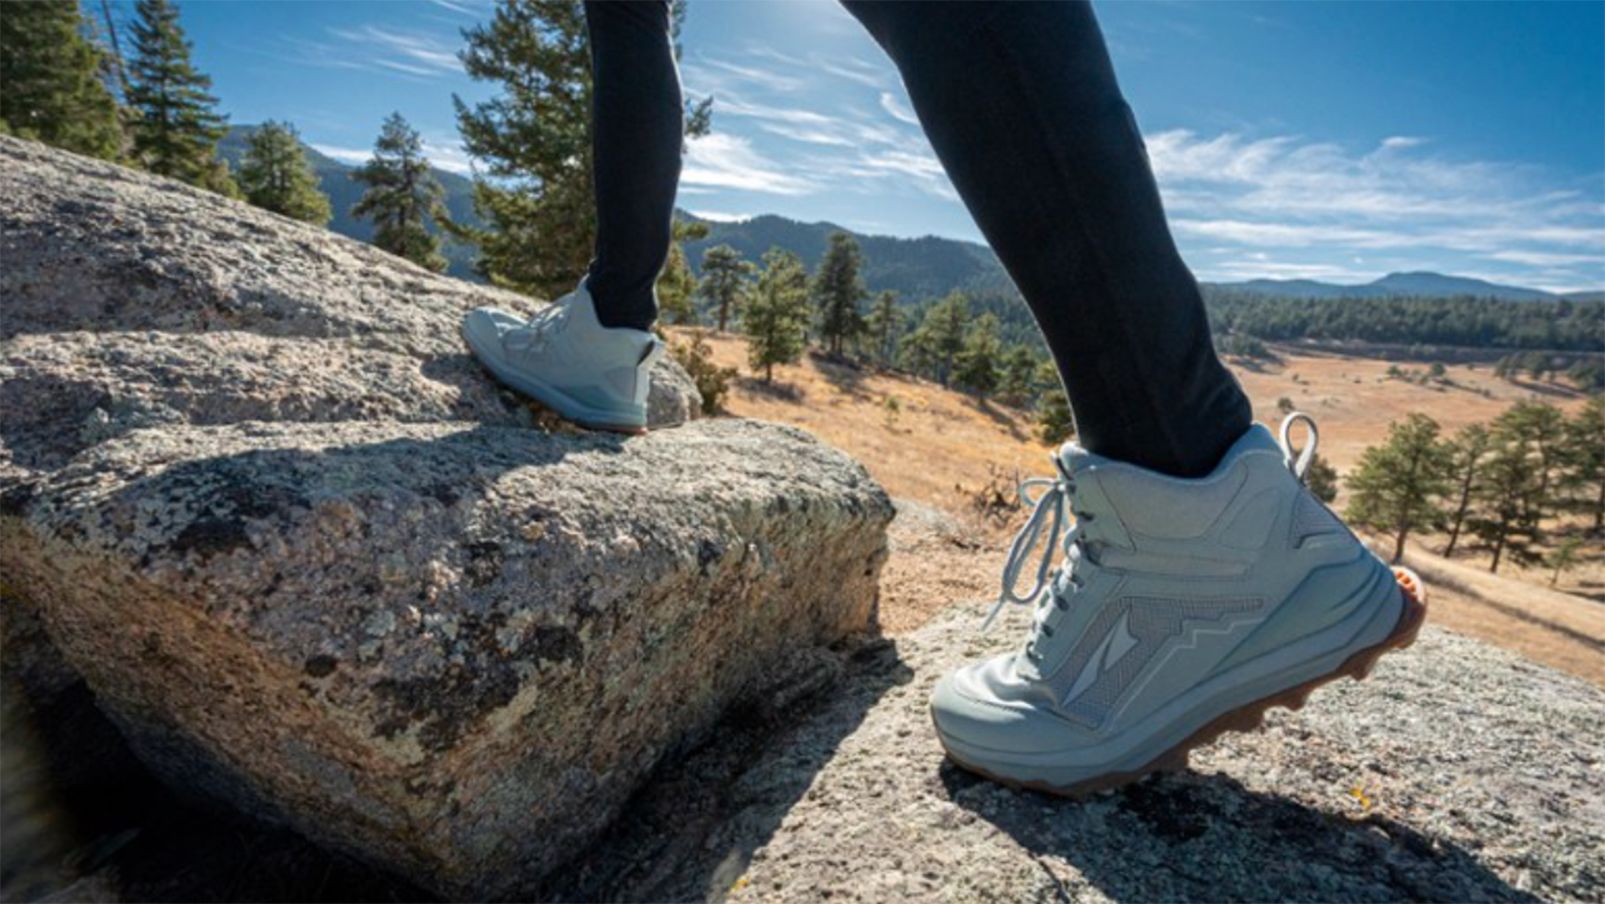 The 10 Best Hiking Shoes for Kids of 2023